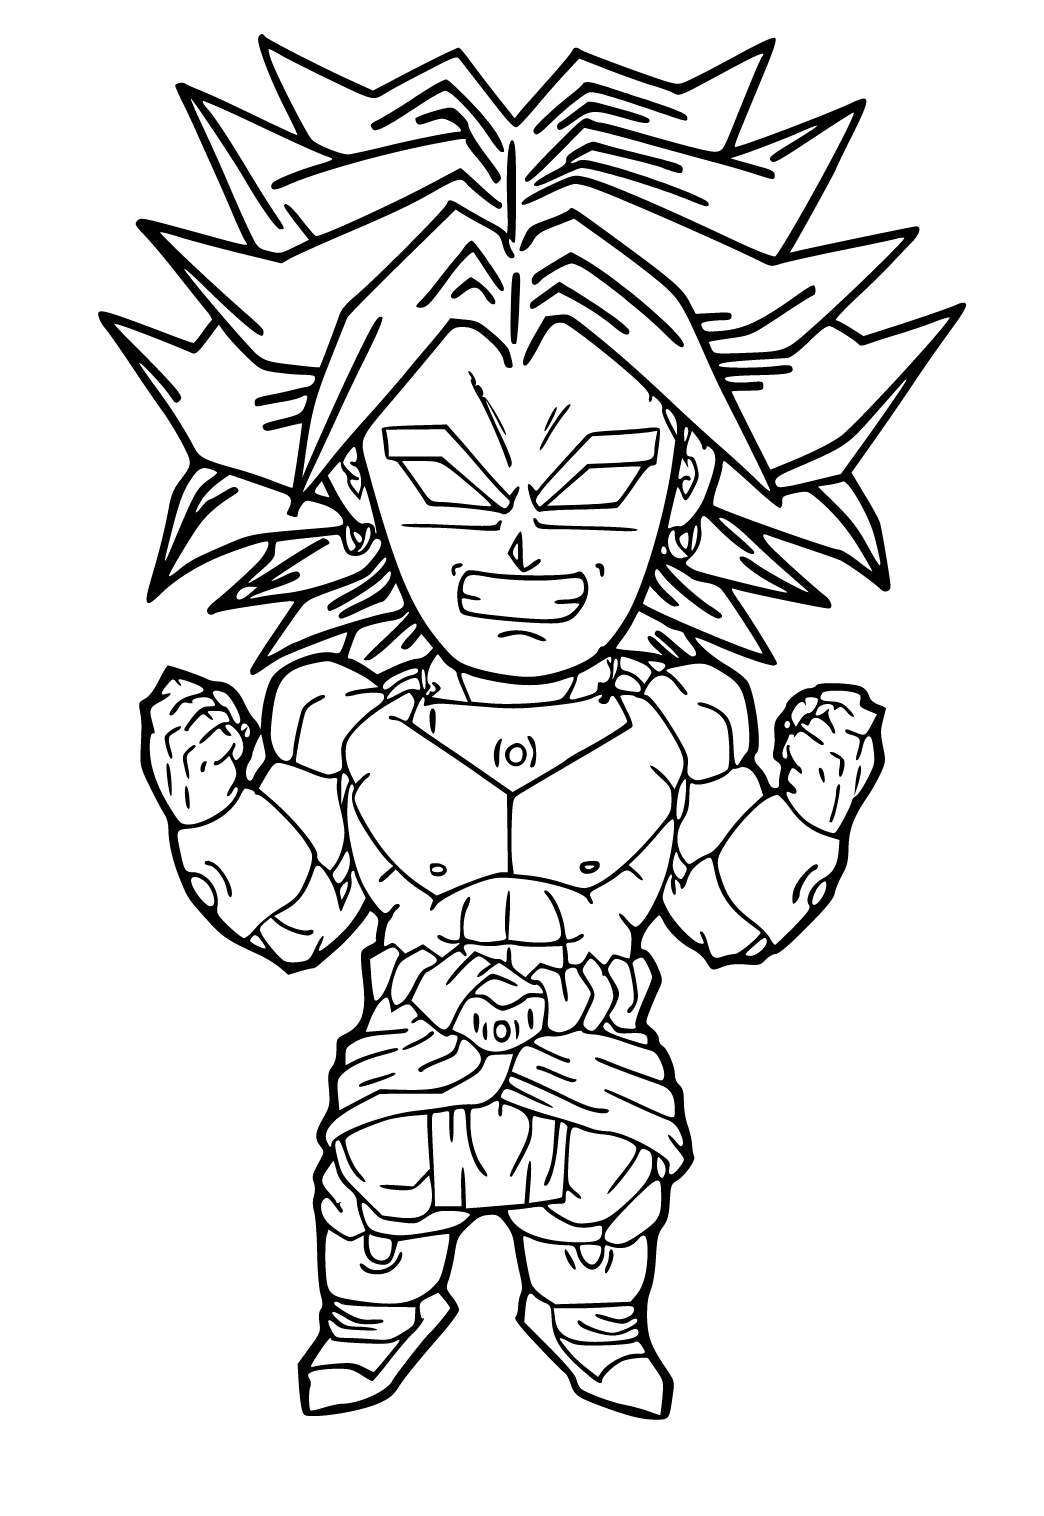 Free Printable Dragon Ball Z Force Coloring Page for Adults and Kids ...